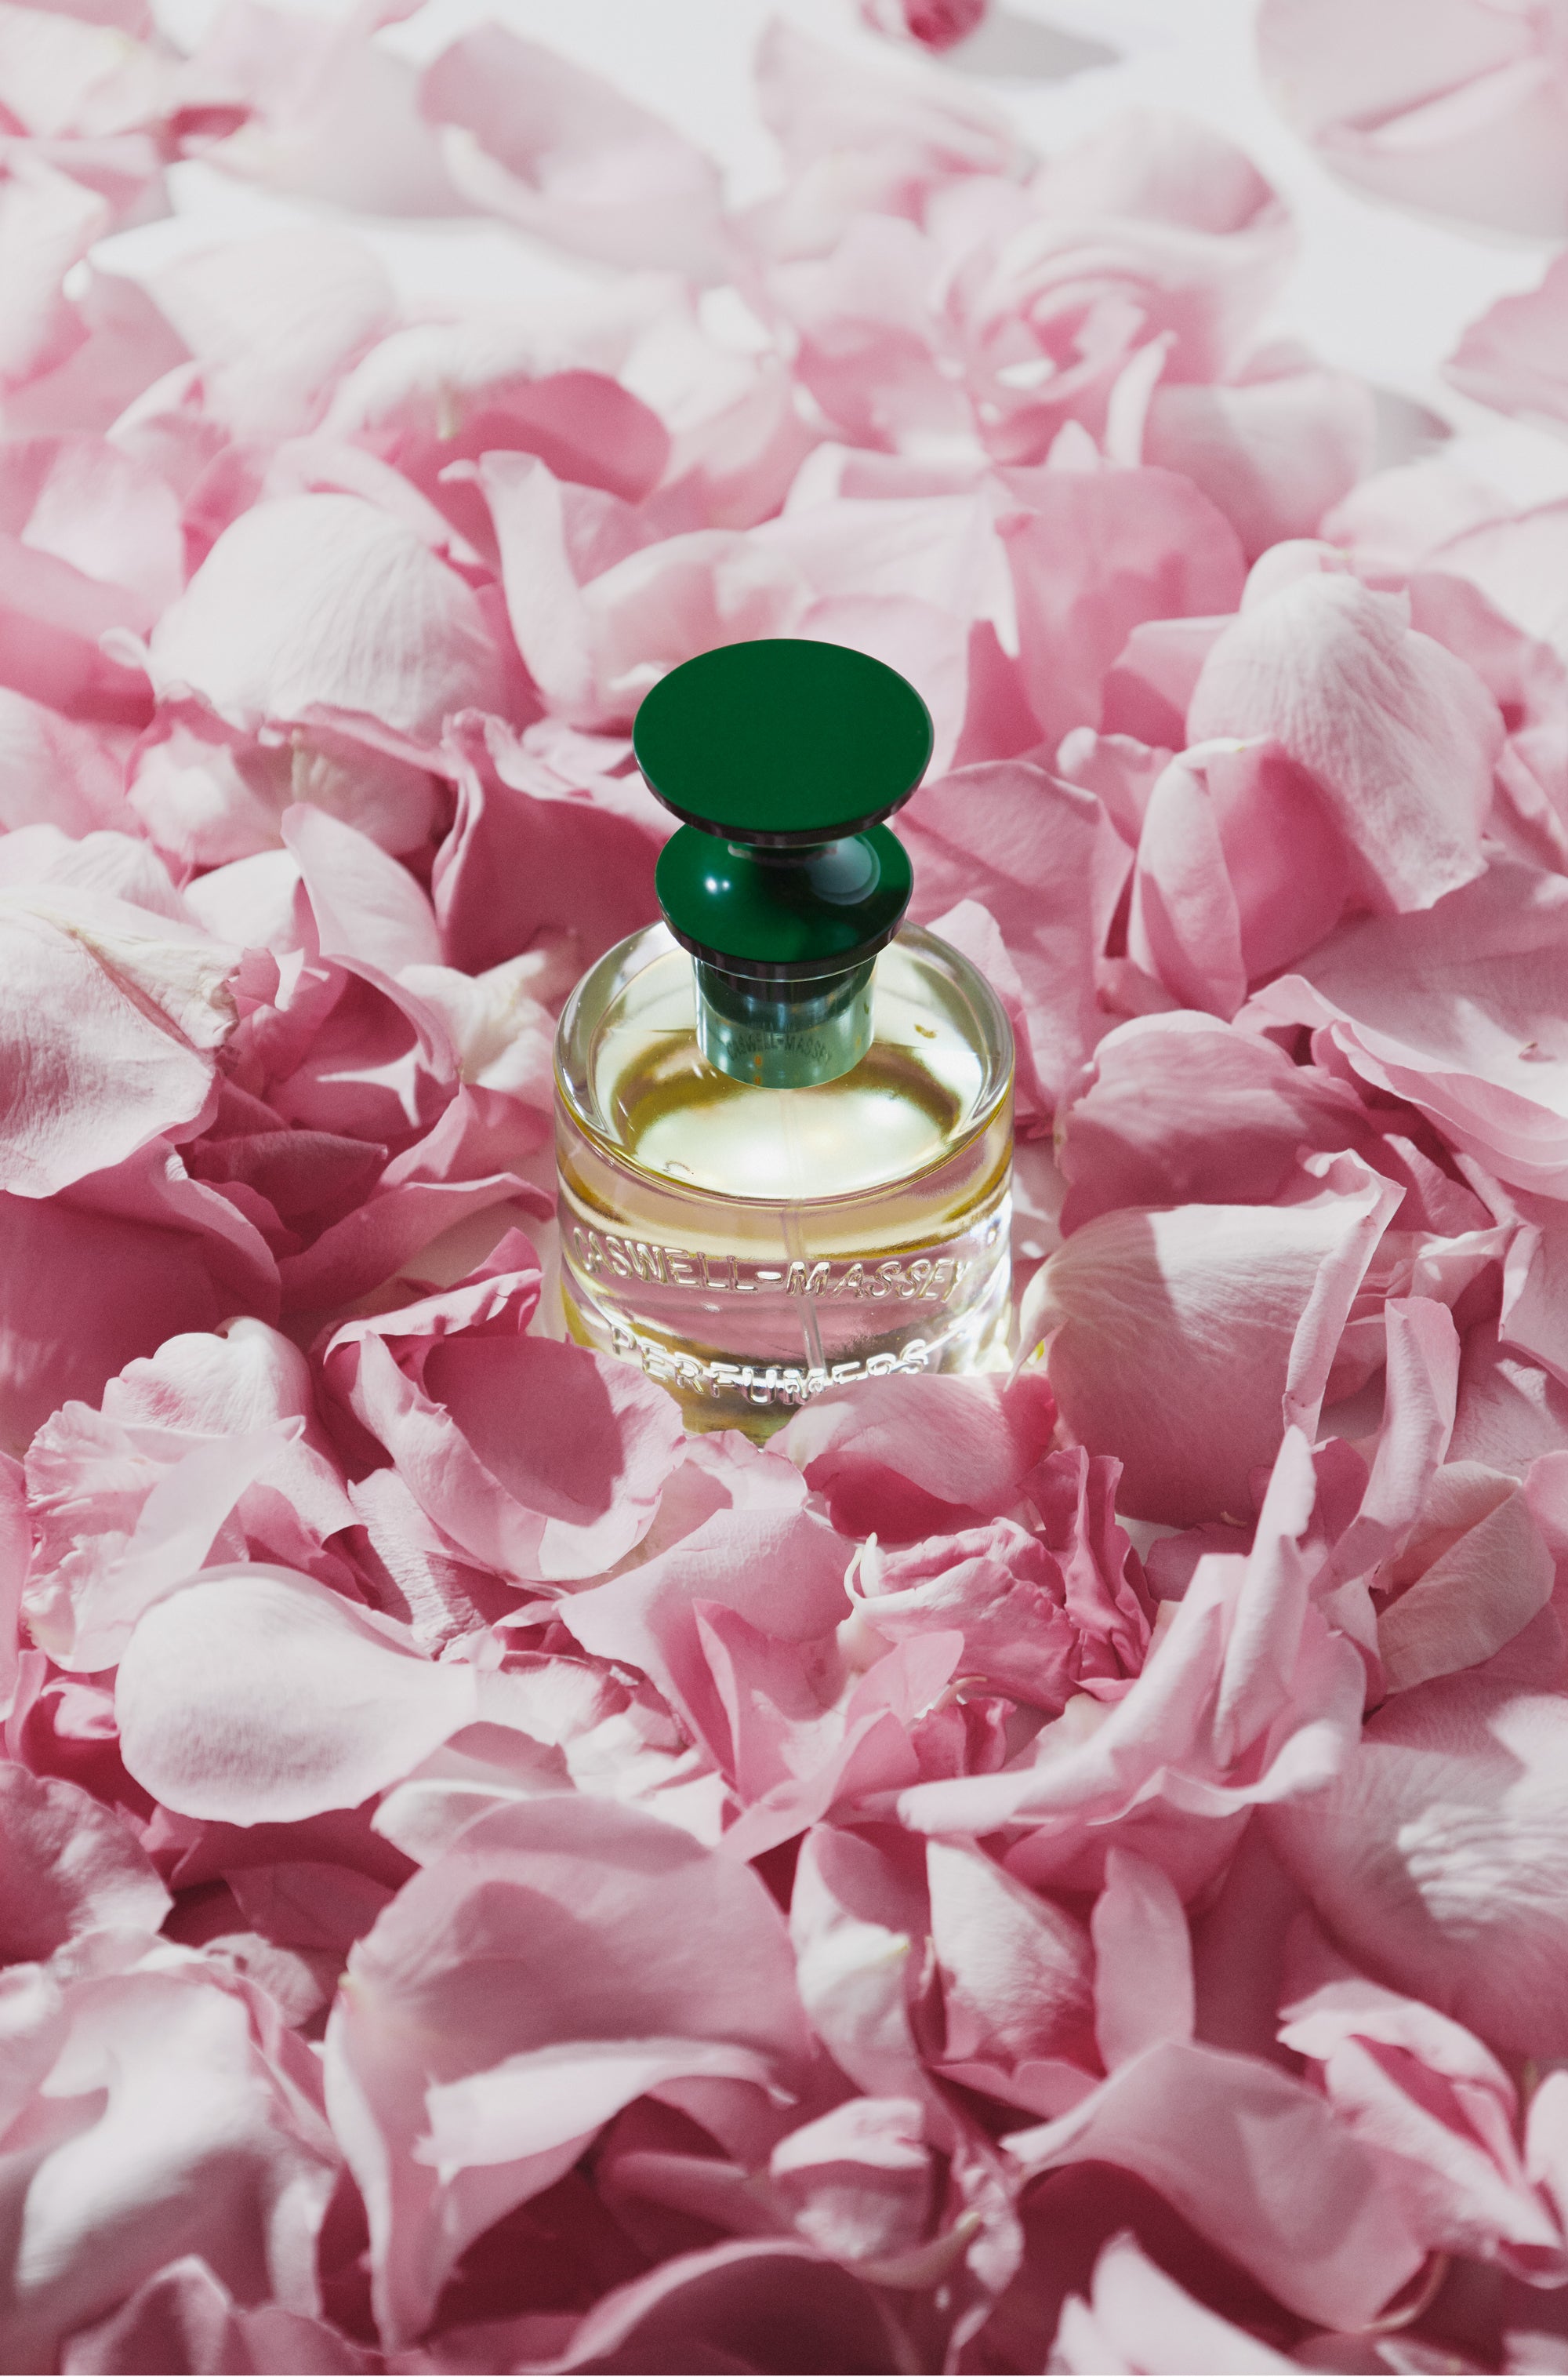 Rose Perfume by Caswell-Massey standing in a bed of soft pink rose petals 